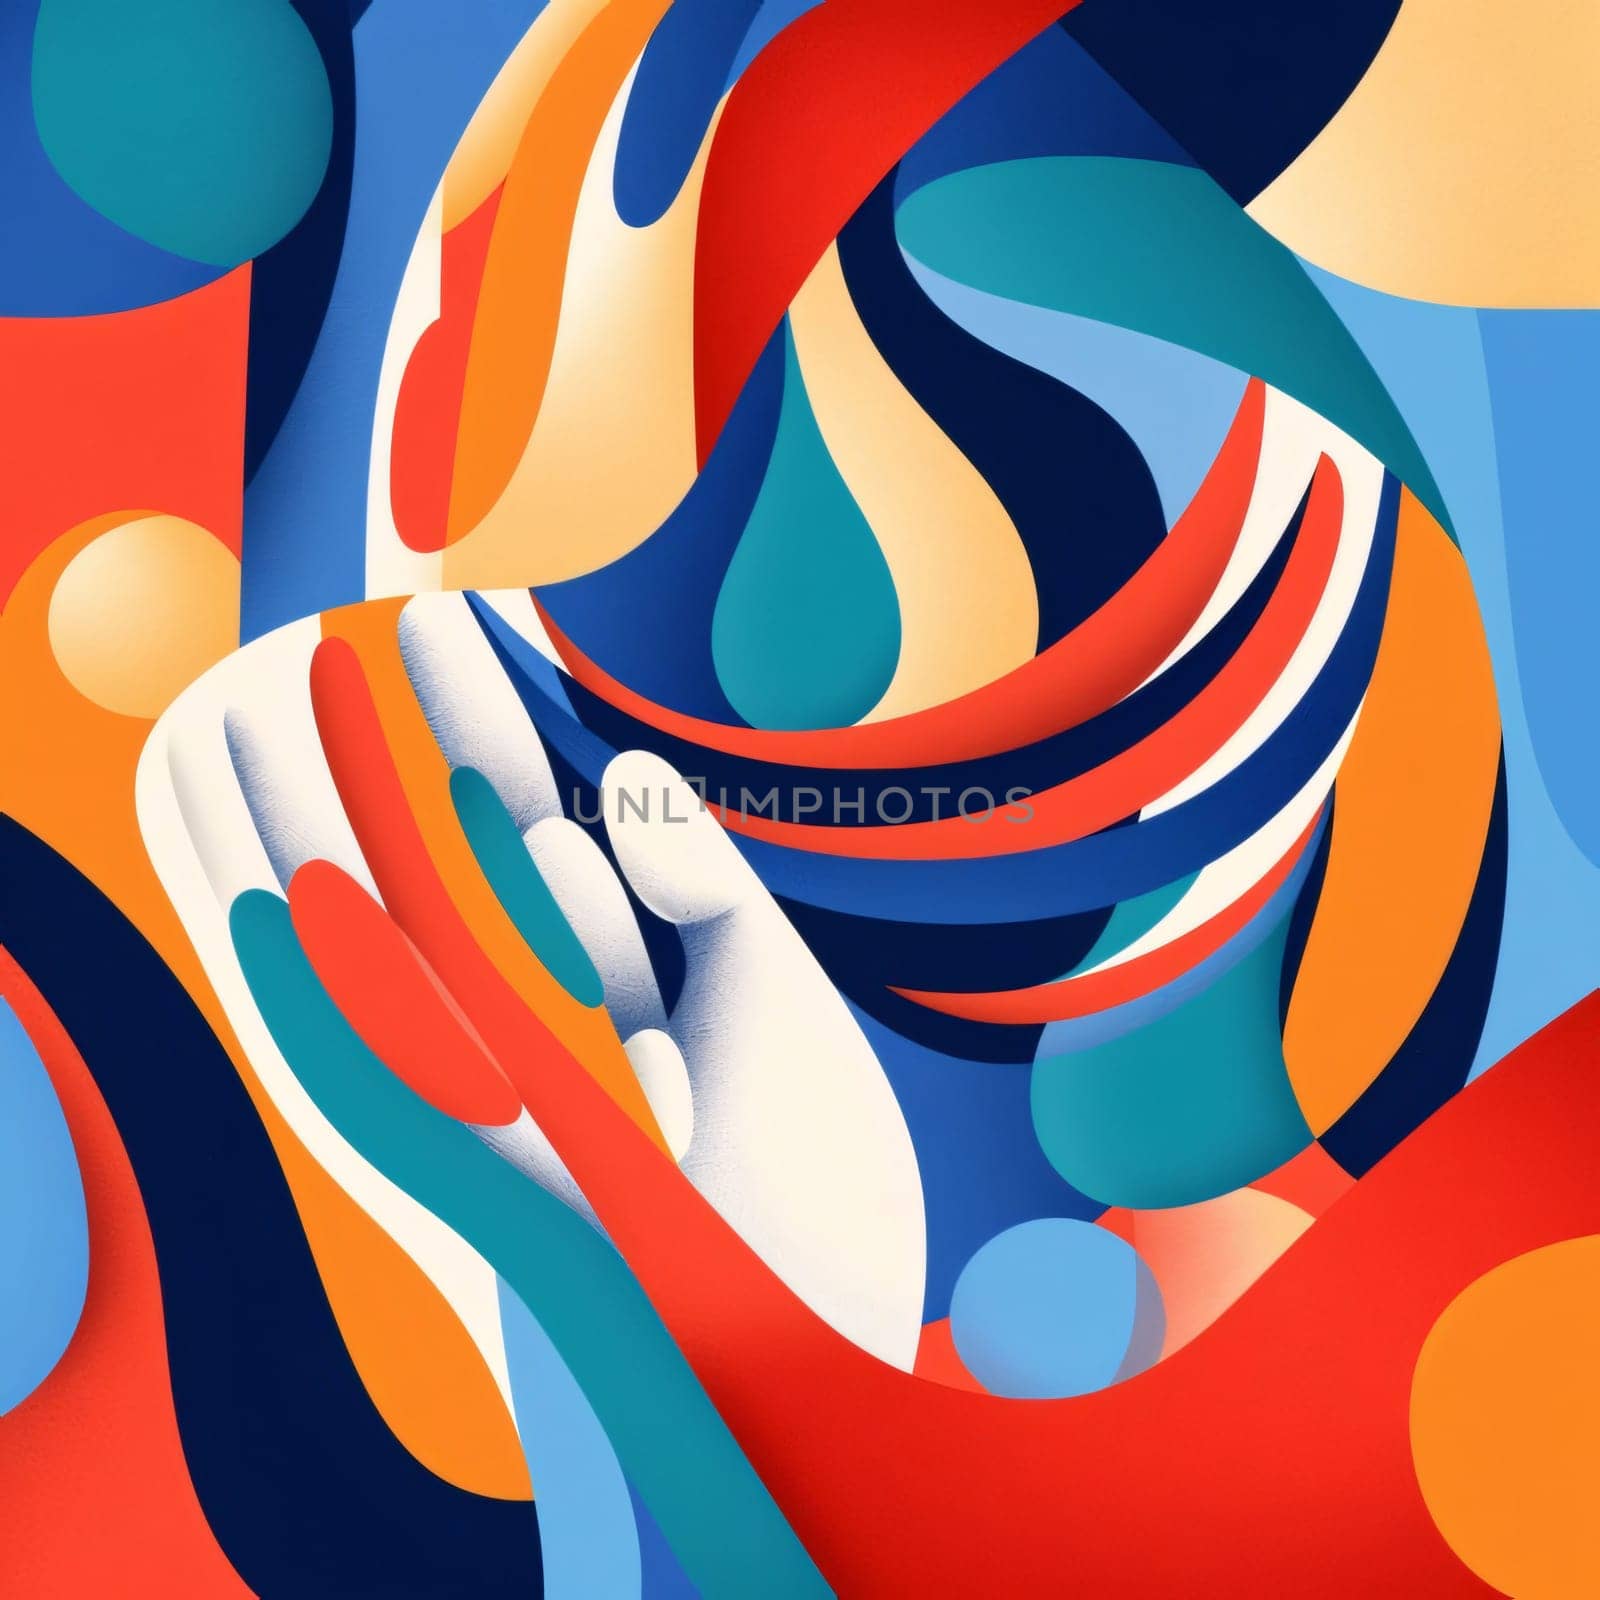 Abstract background design: Abstract colorful background with human hands. Vector illustration. Eps 10.